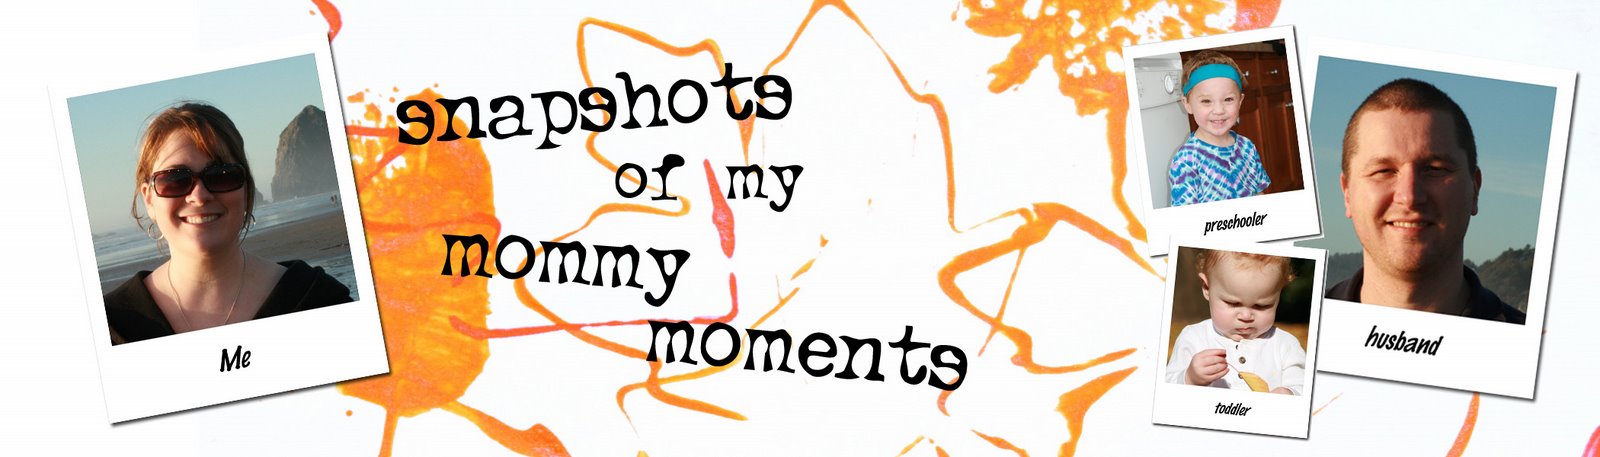 snapshots of my mommy moments